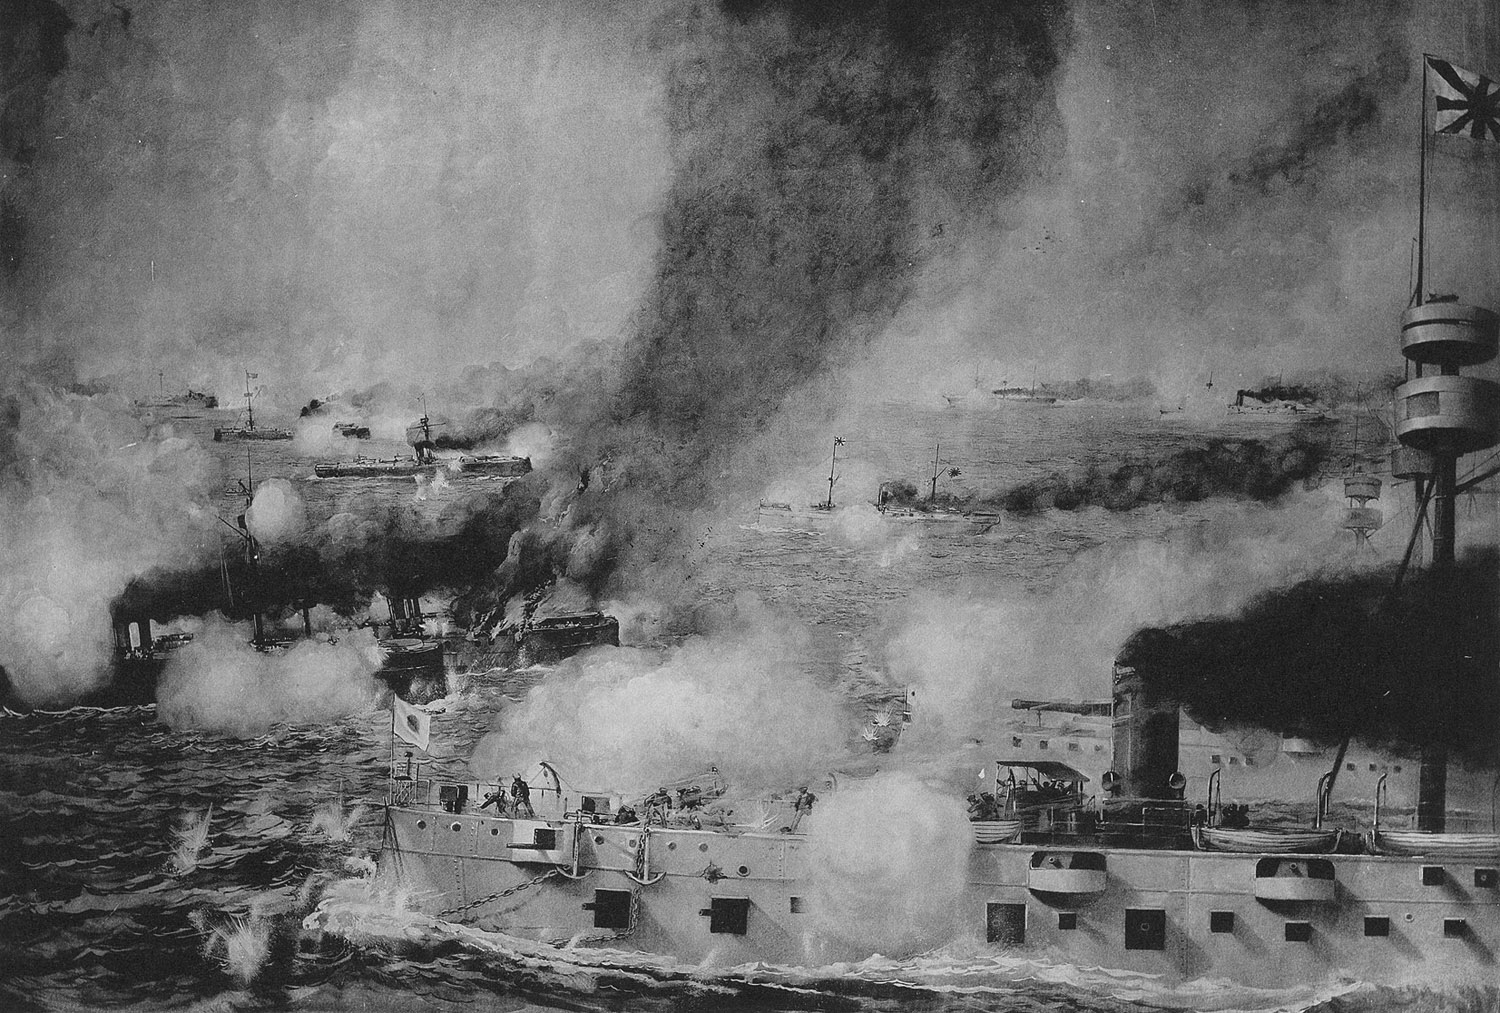 Flagship Matsushima in the midst of the battle